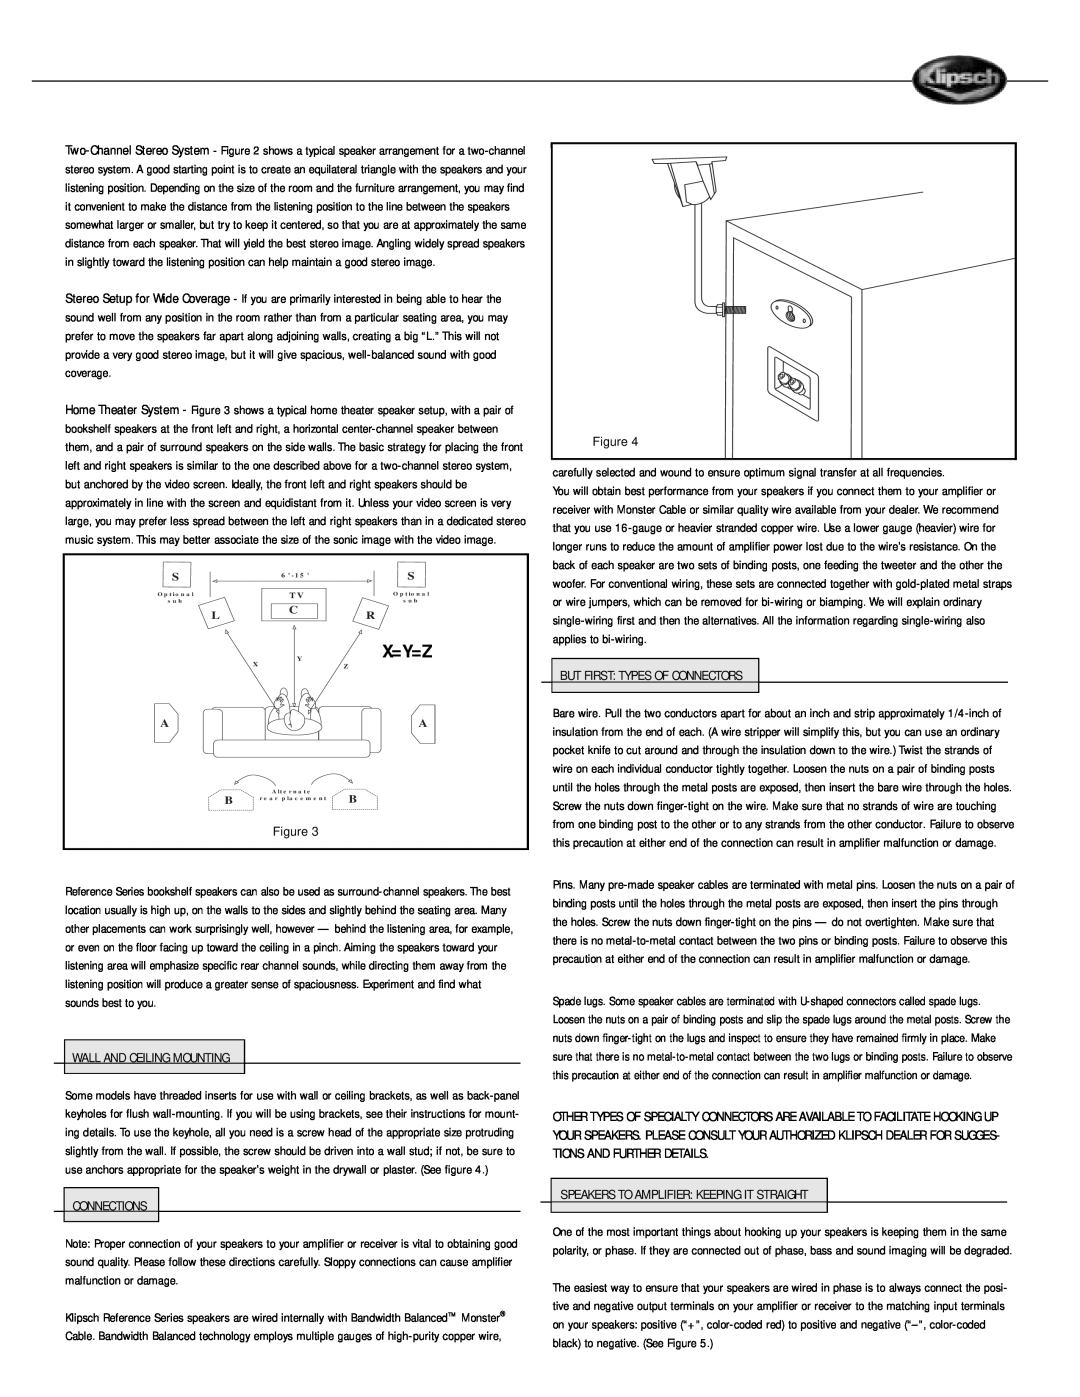 Klipsch Speaker owner manual Wall And Ceiling Mounting, Connections, But First Types Of Connectors 